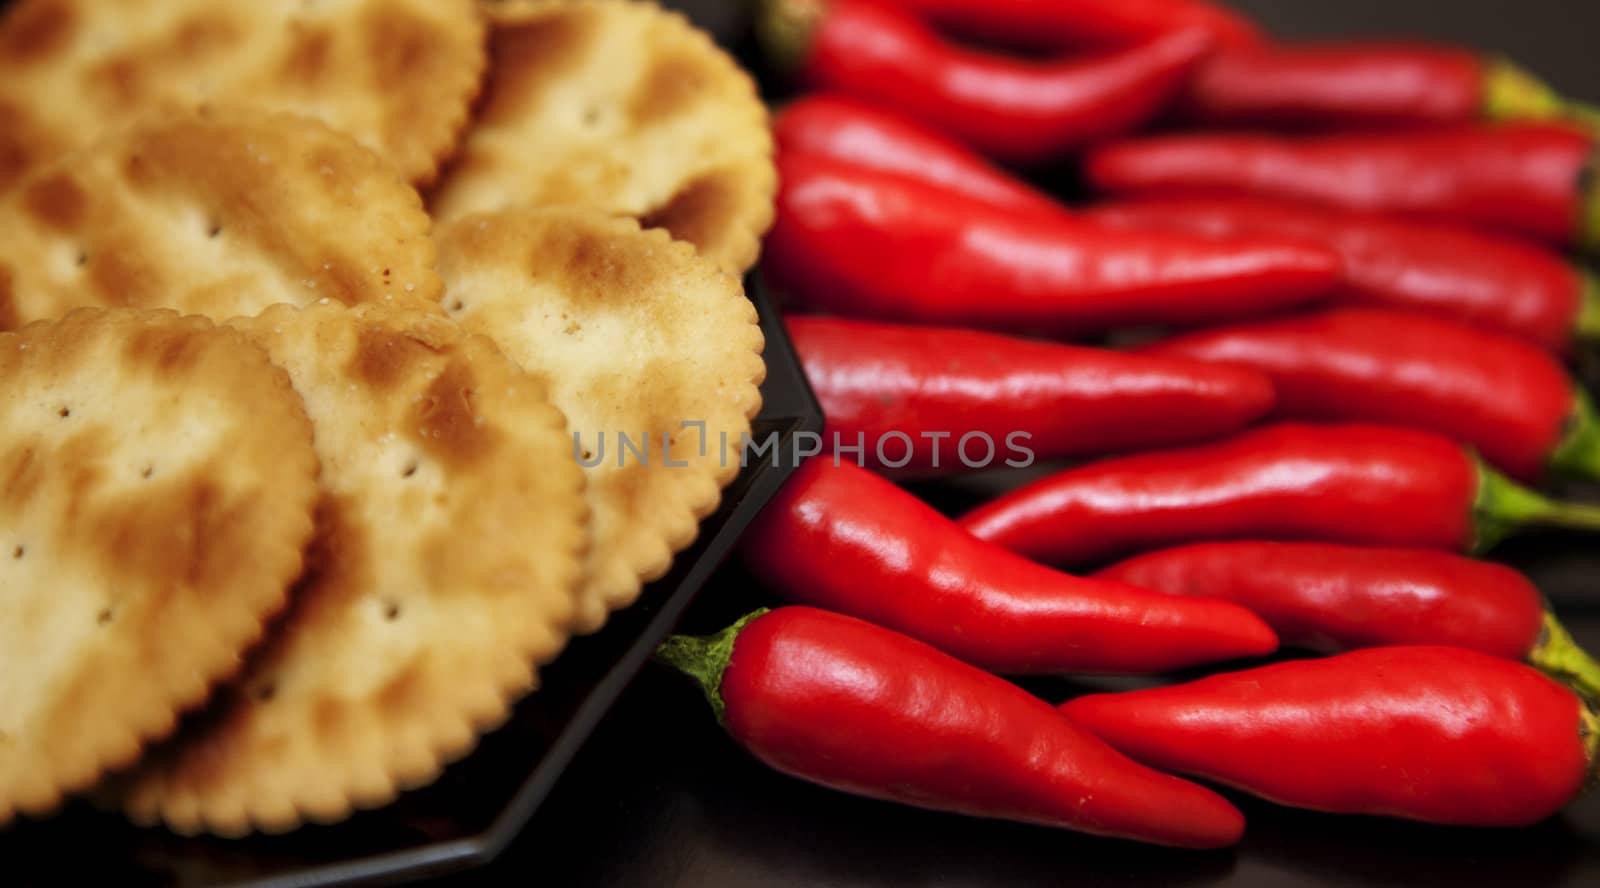 Chillies and crackers by monkeystock